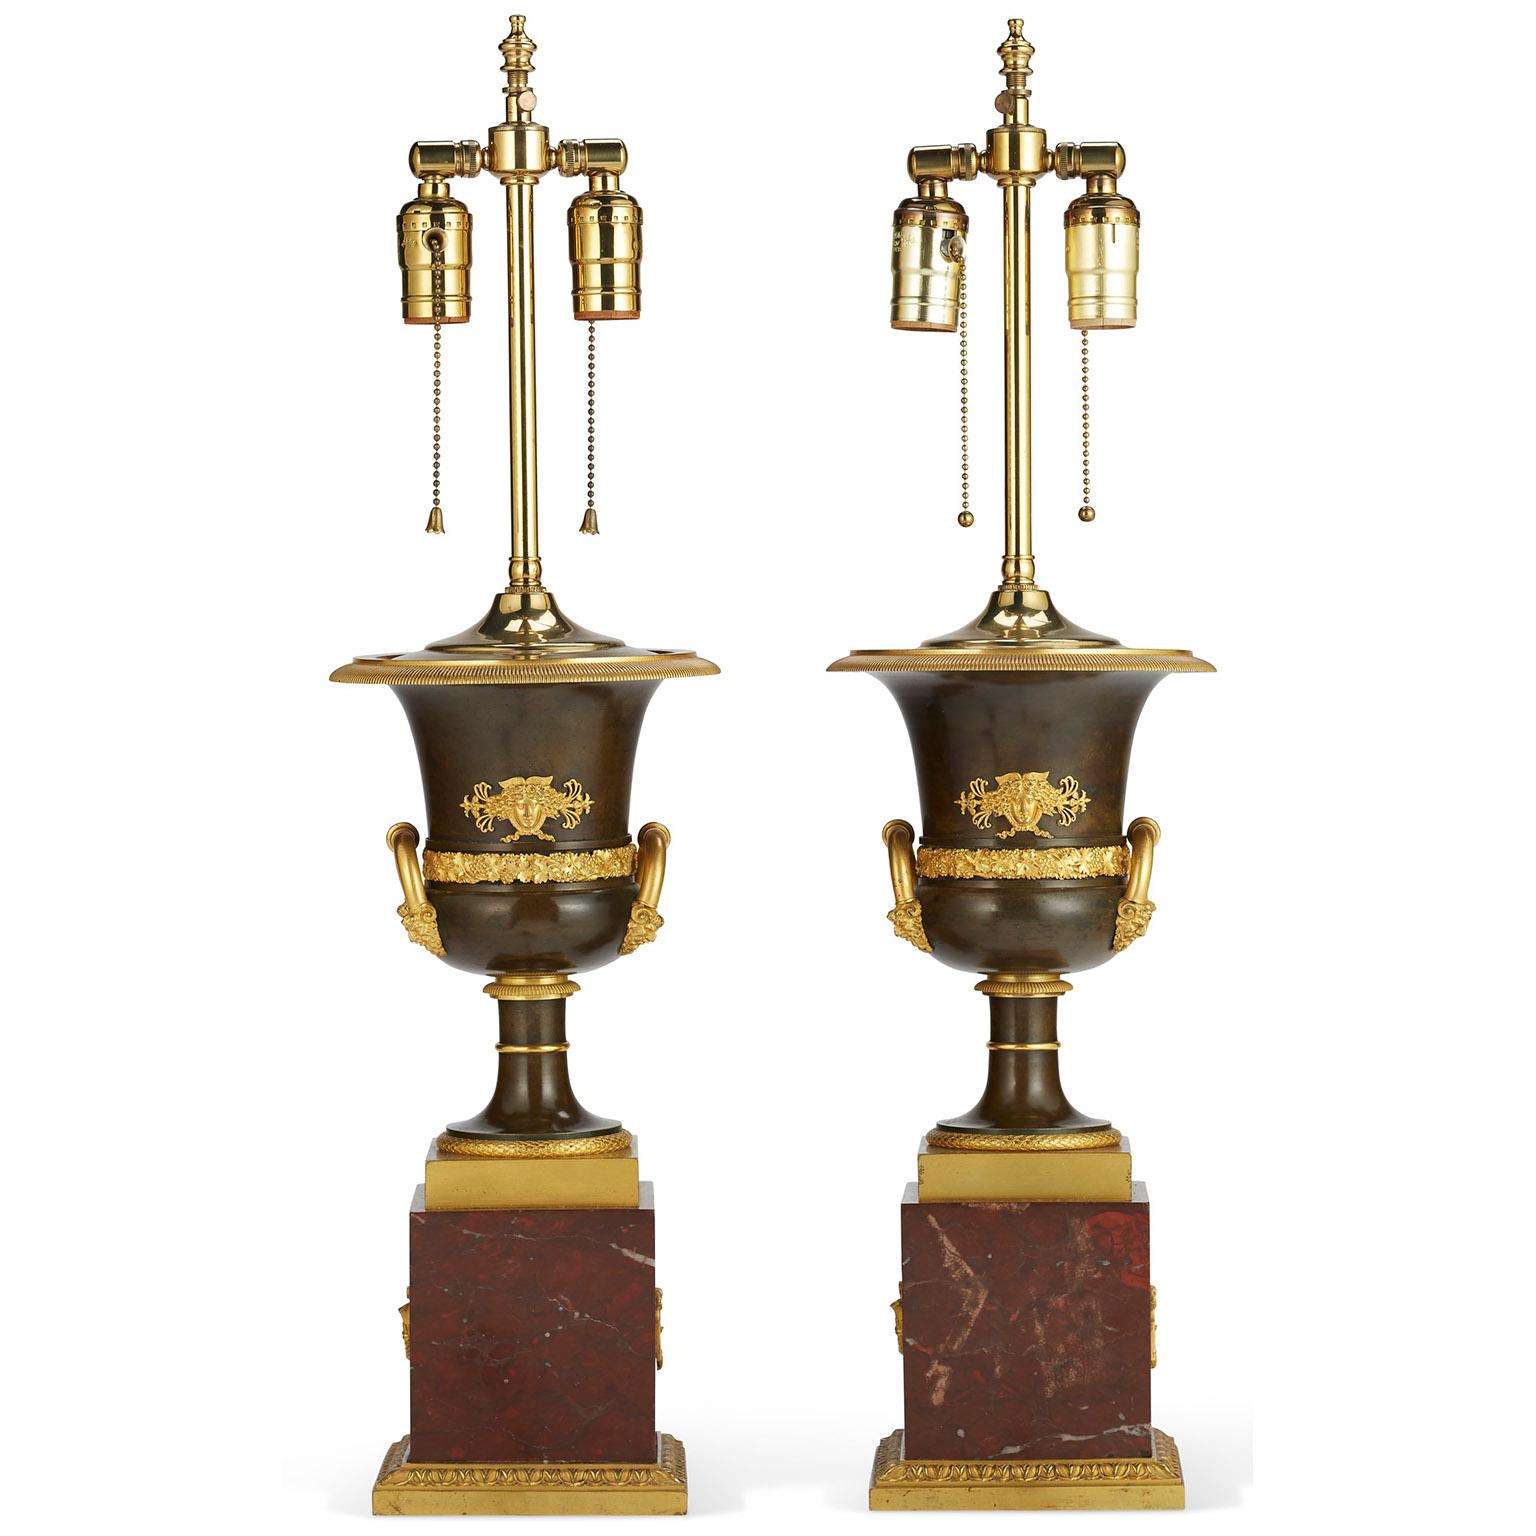 Pair French 19th Century Napoleon III Empire Style Gilt-Bronze Urn Table Lamps For Sale 1